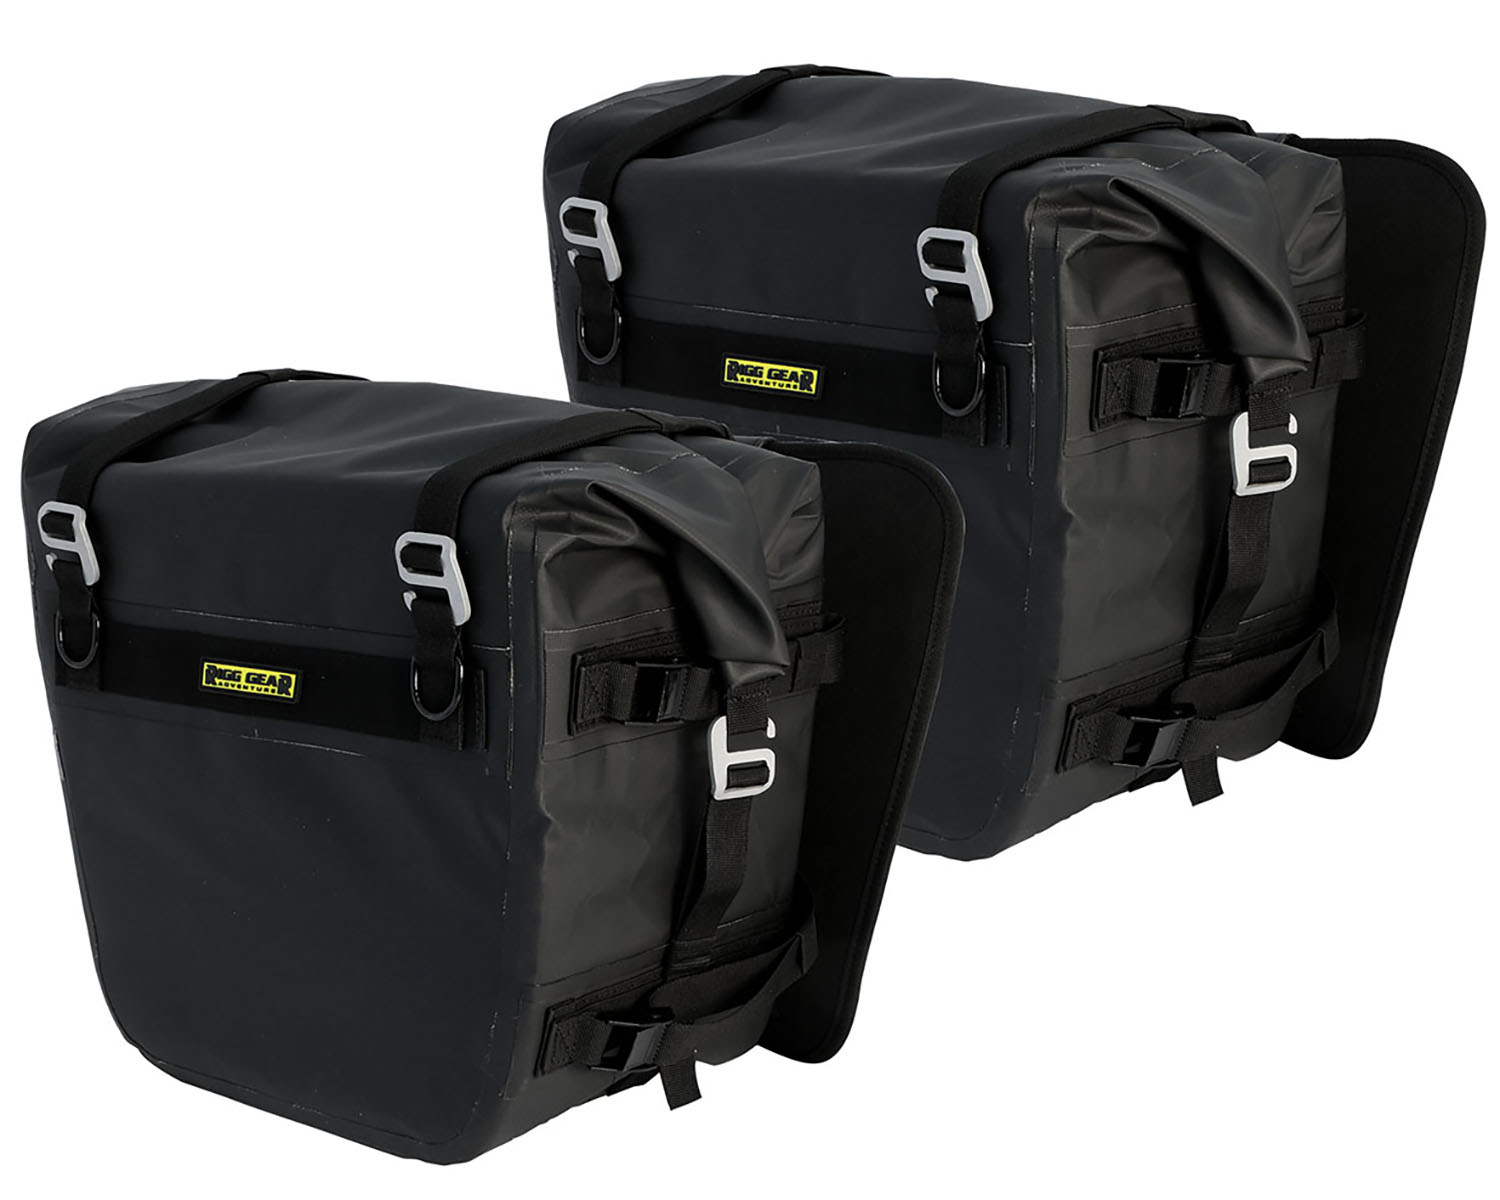 Nelson Rigg SE-3050-BLK Waterproof Motorcycle Dry Saddlebags